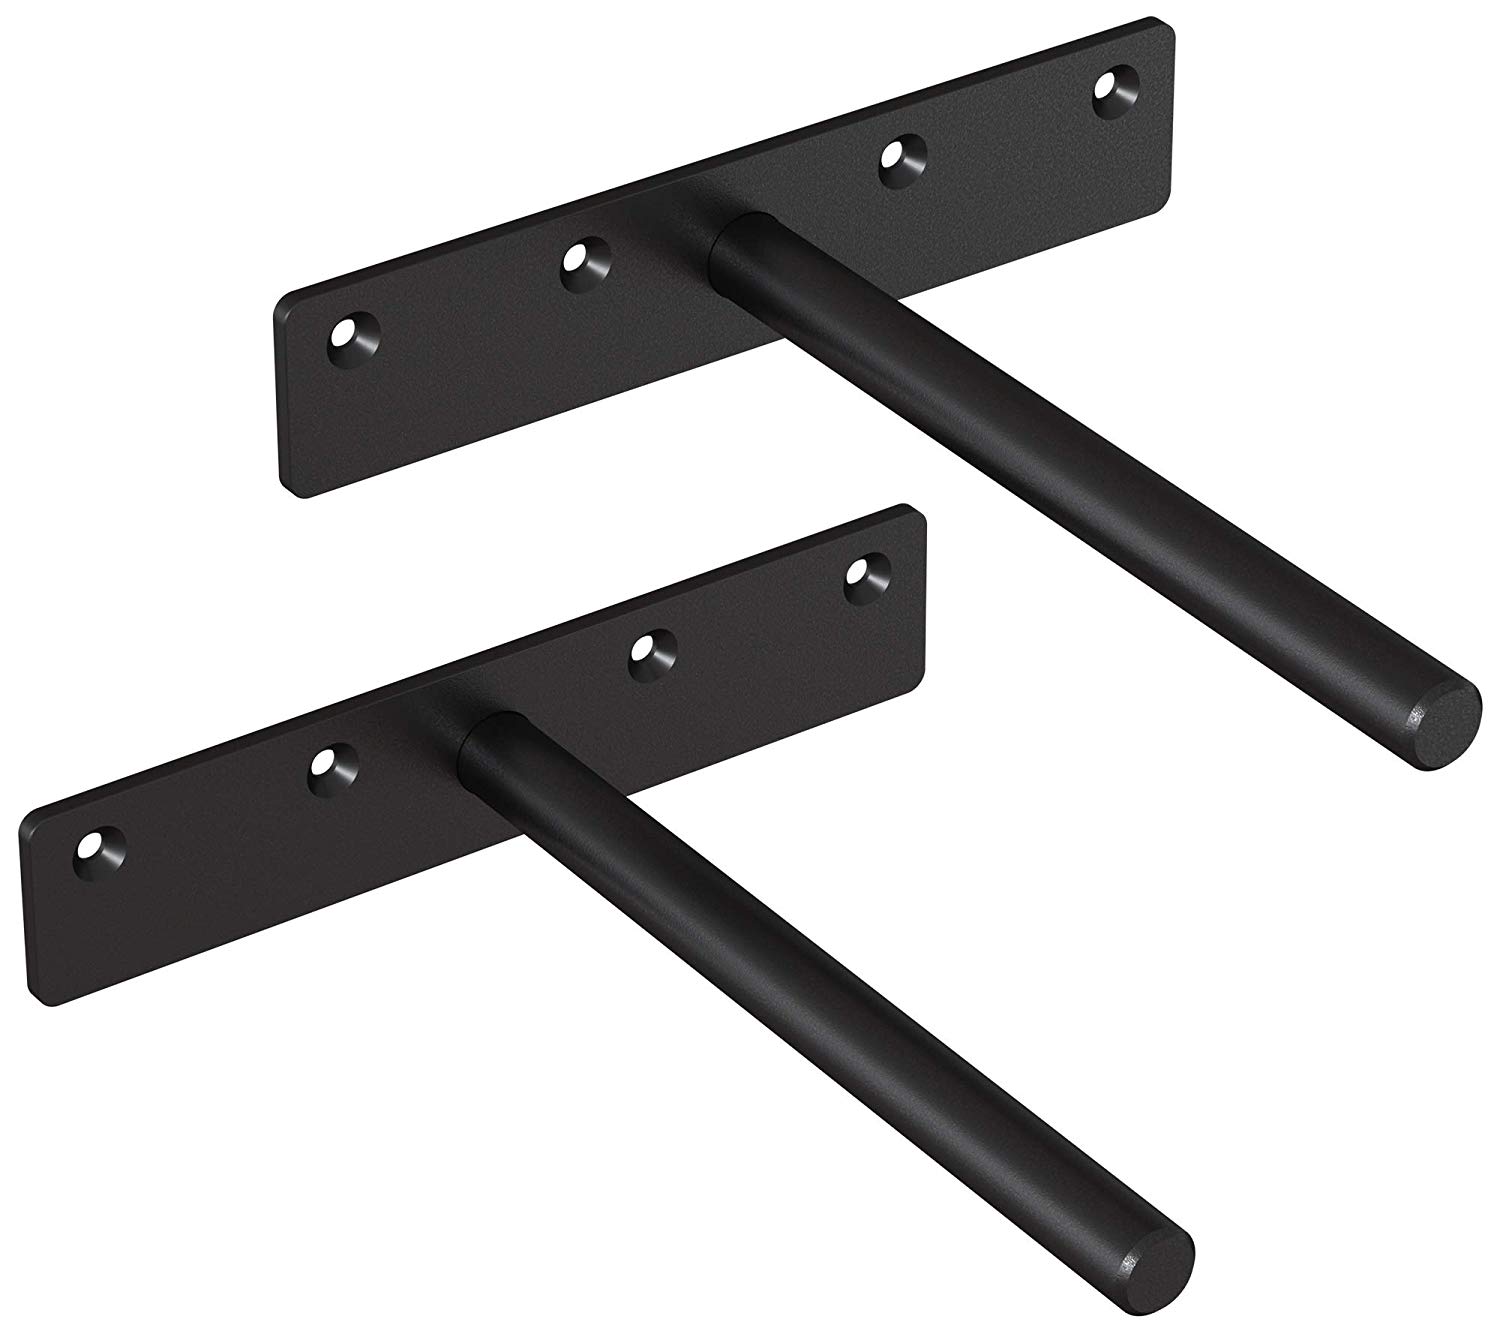 tibres floating shelf brackets heavy duty invisible large hidden for wooden rustproof blind supports solid steel concealed set ikea kallax measurements locking french cleat